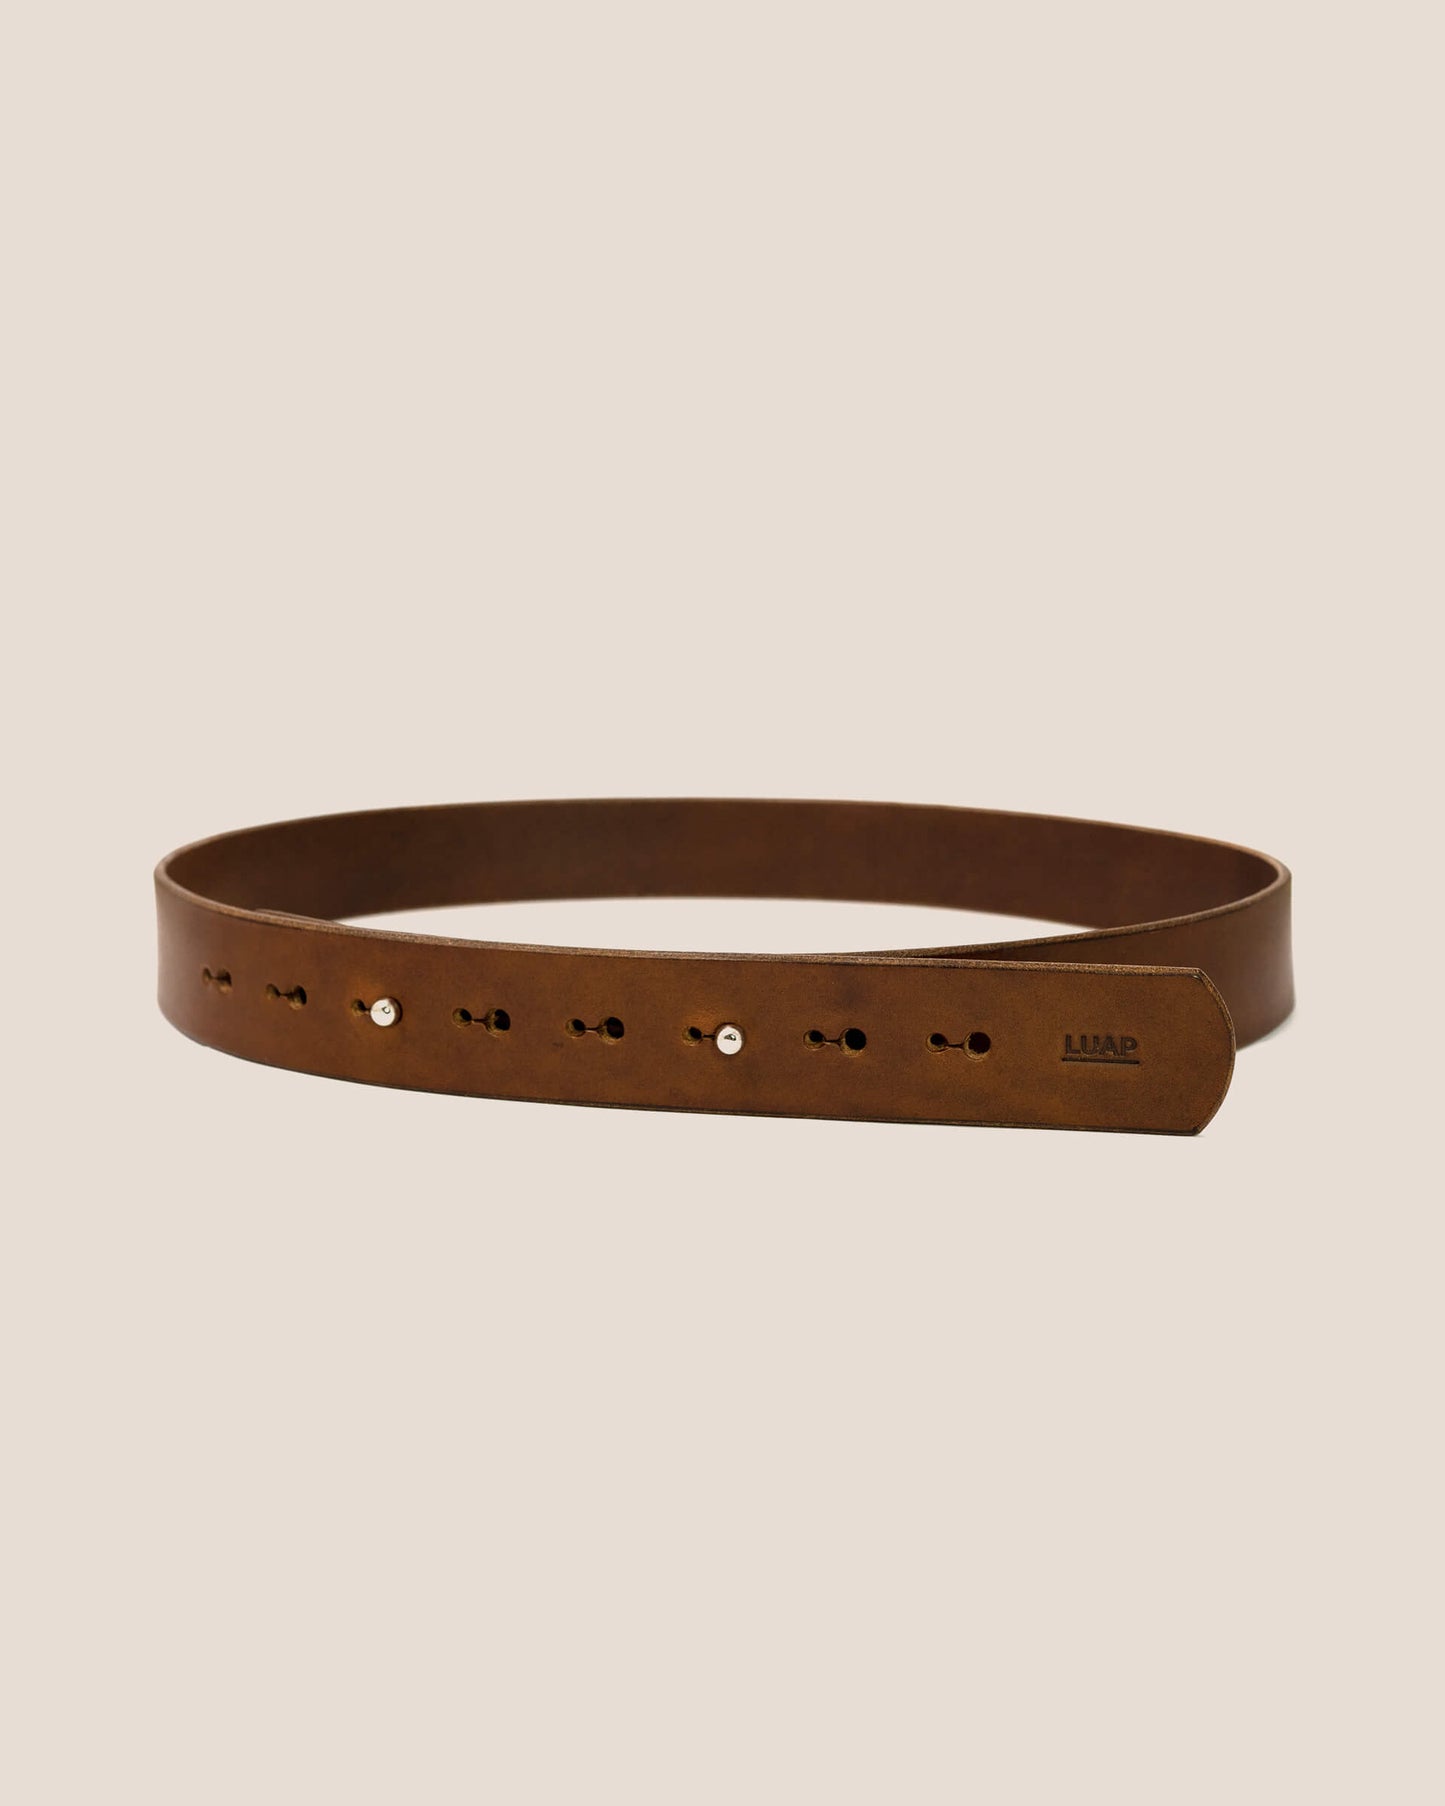 No Buckle Belt Leather LUAP